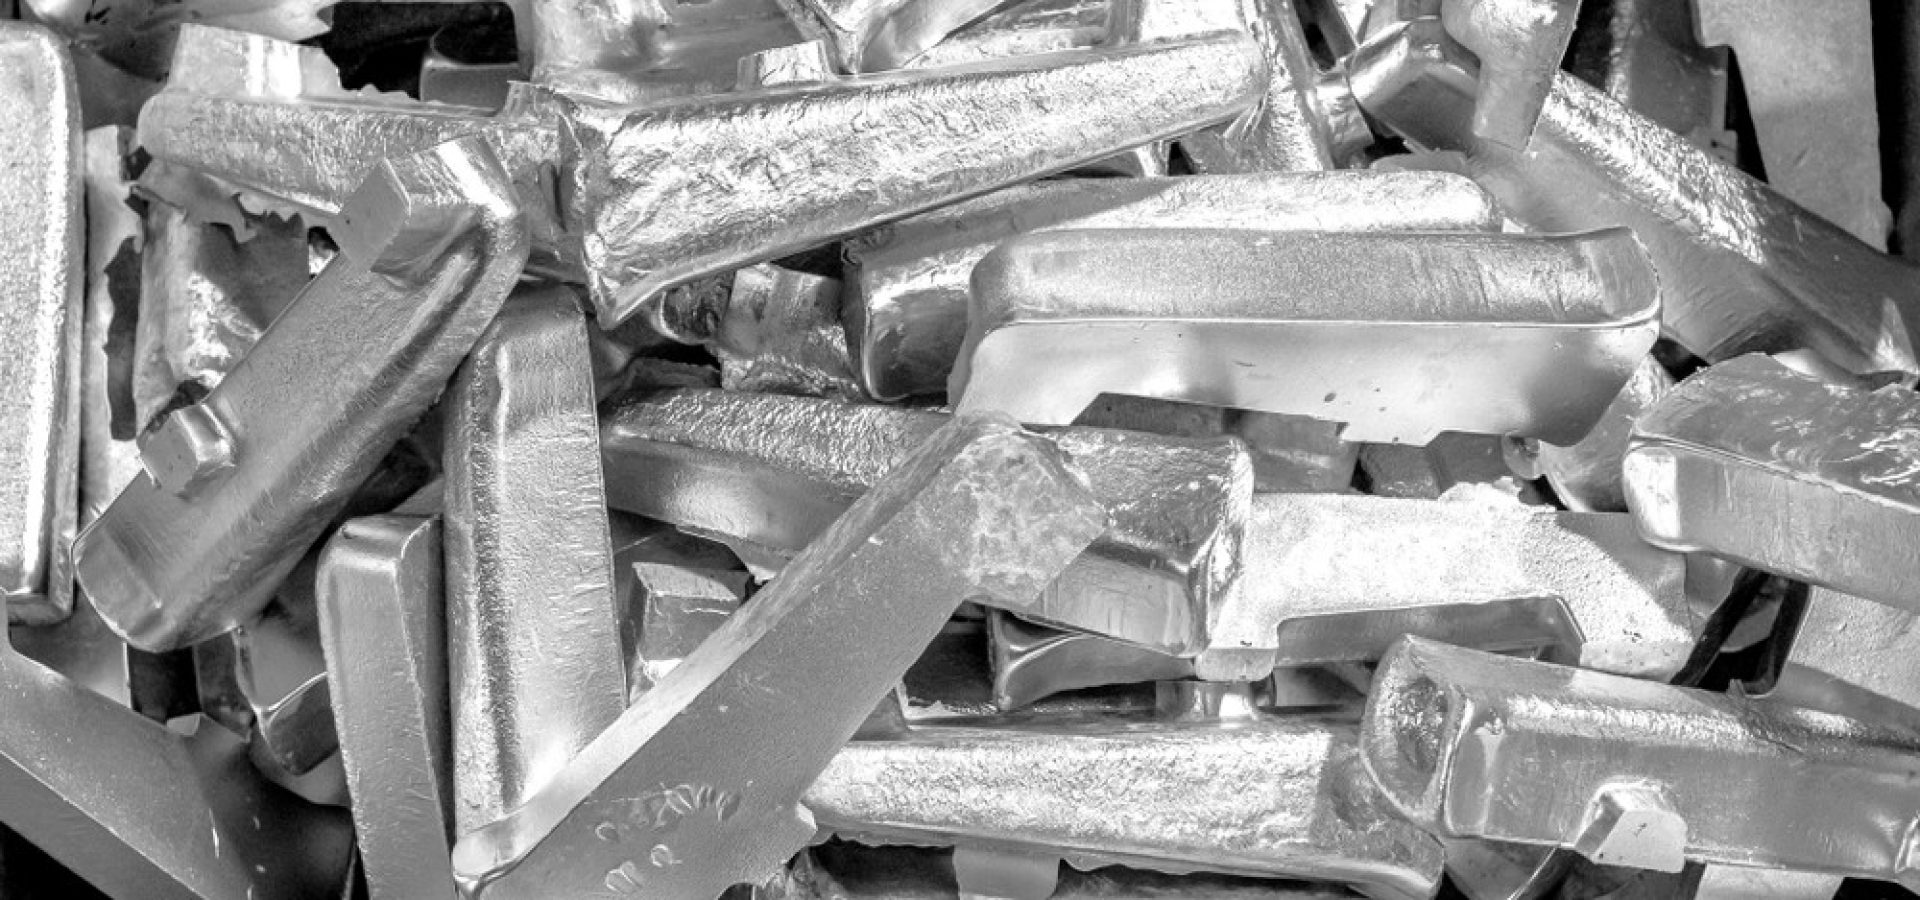 Covid-19's impact on platinum is less than feared, according to the WPIC